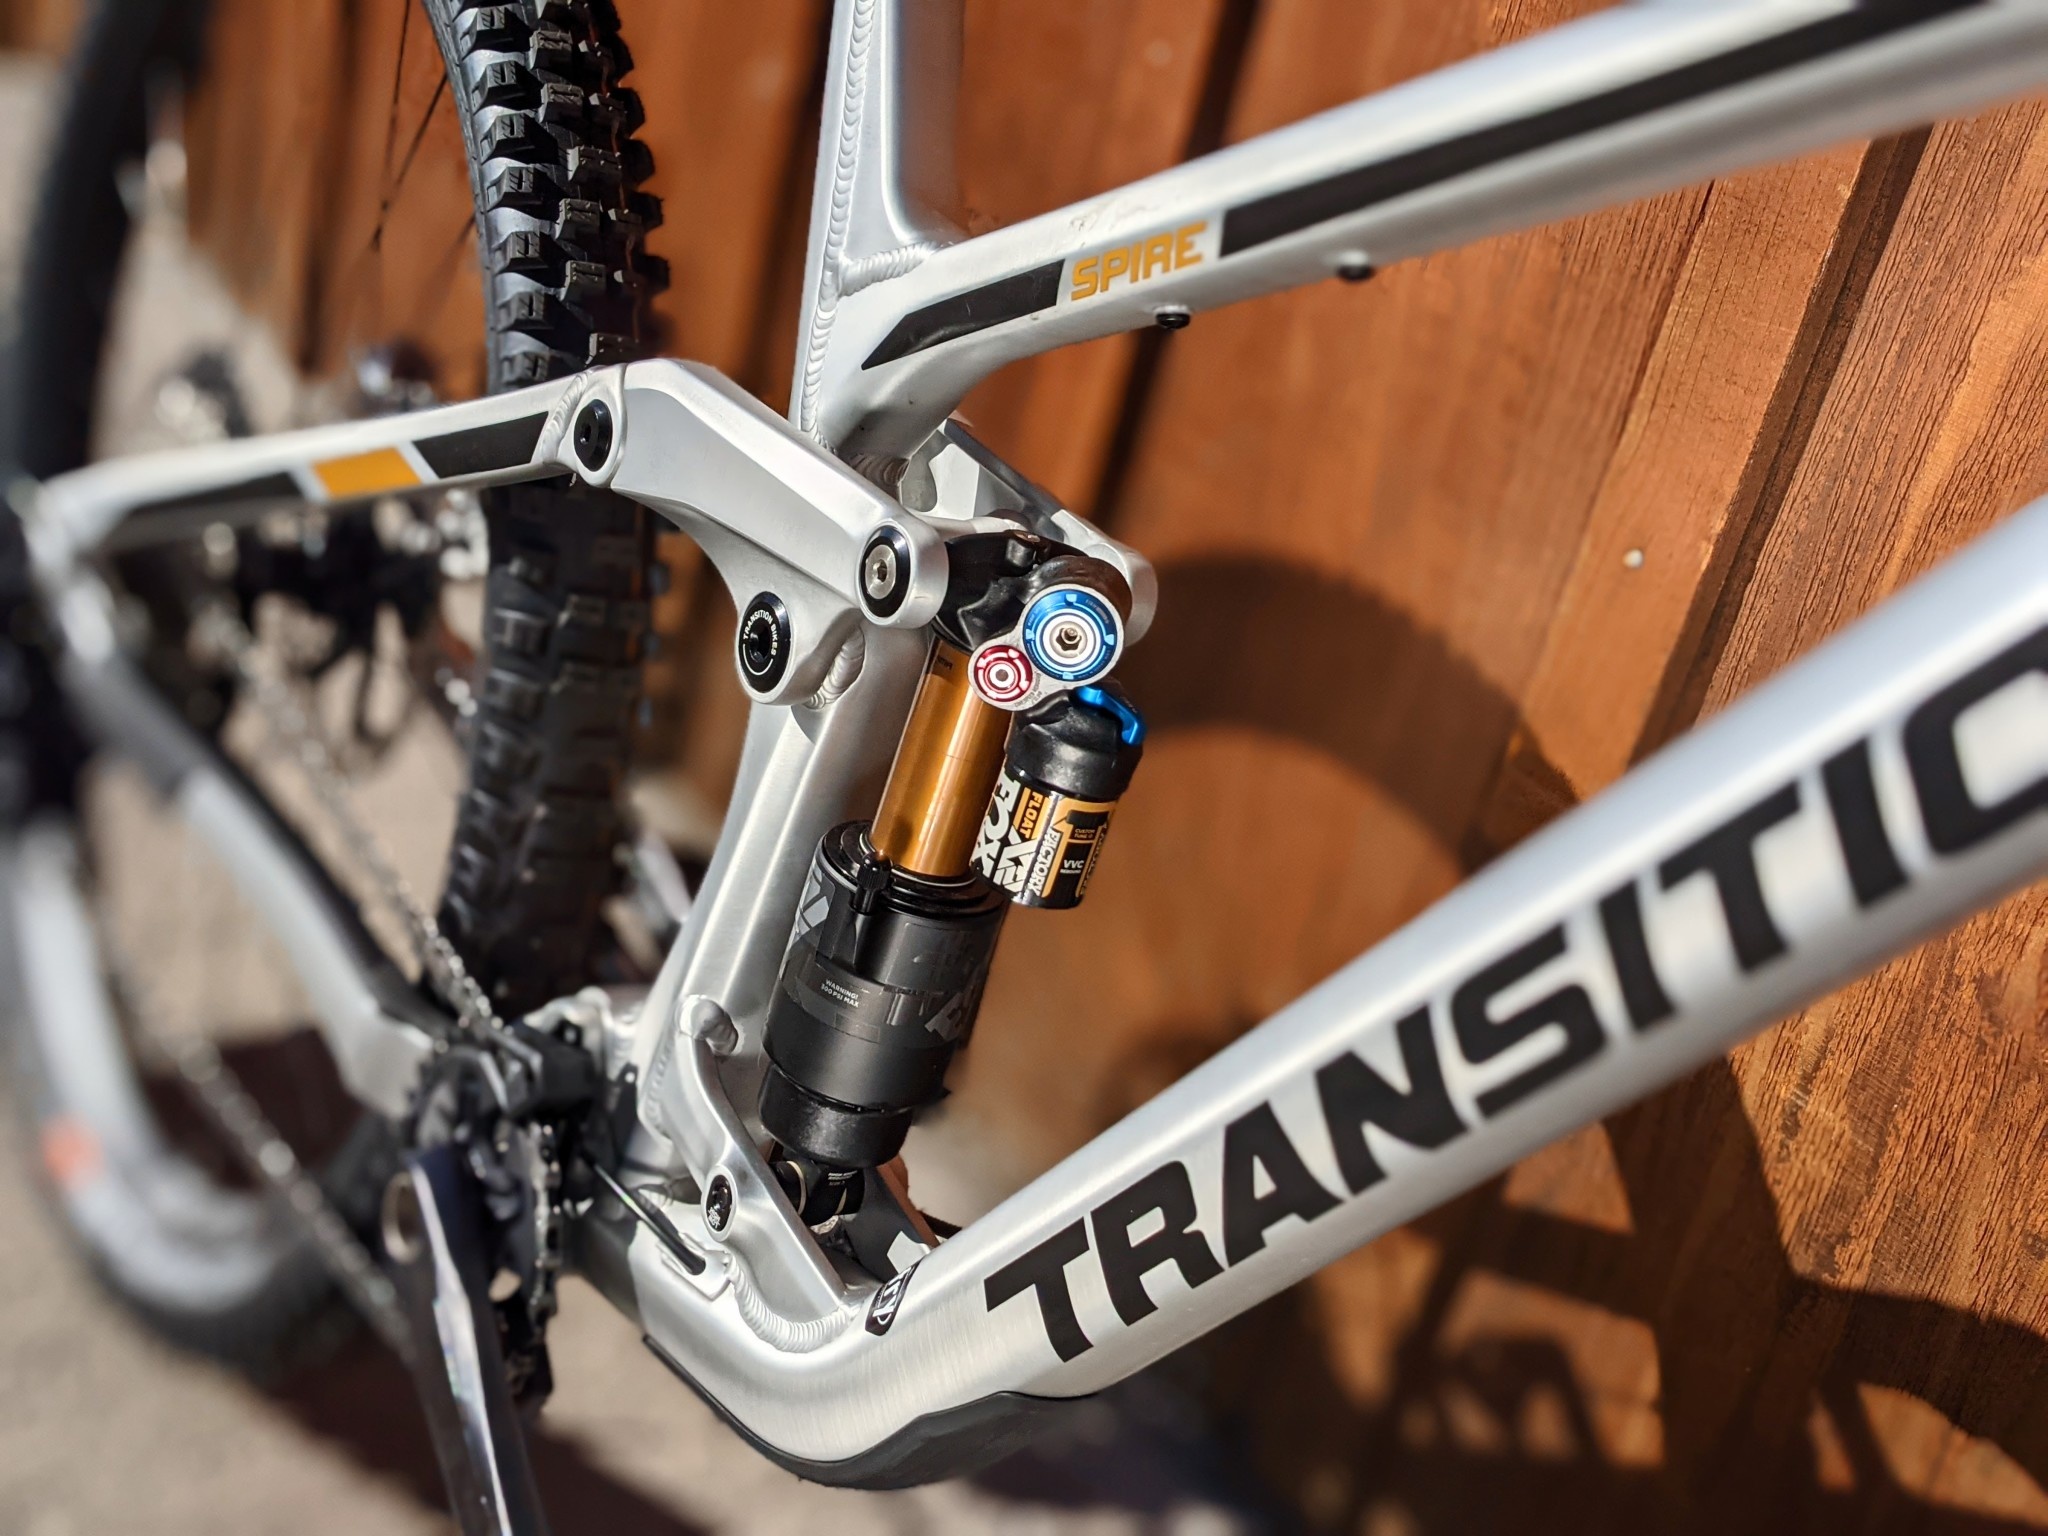 Transition Spire XT 2022 // Bike Review 